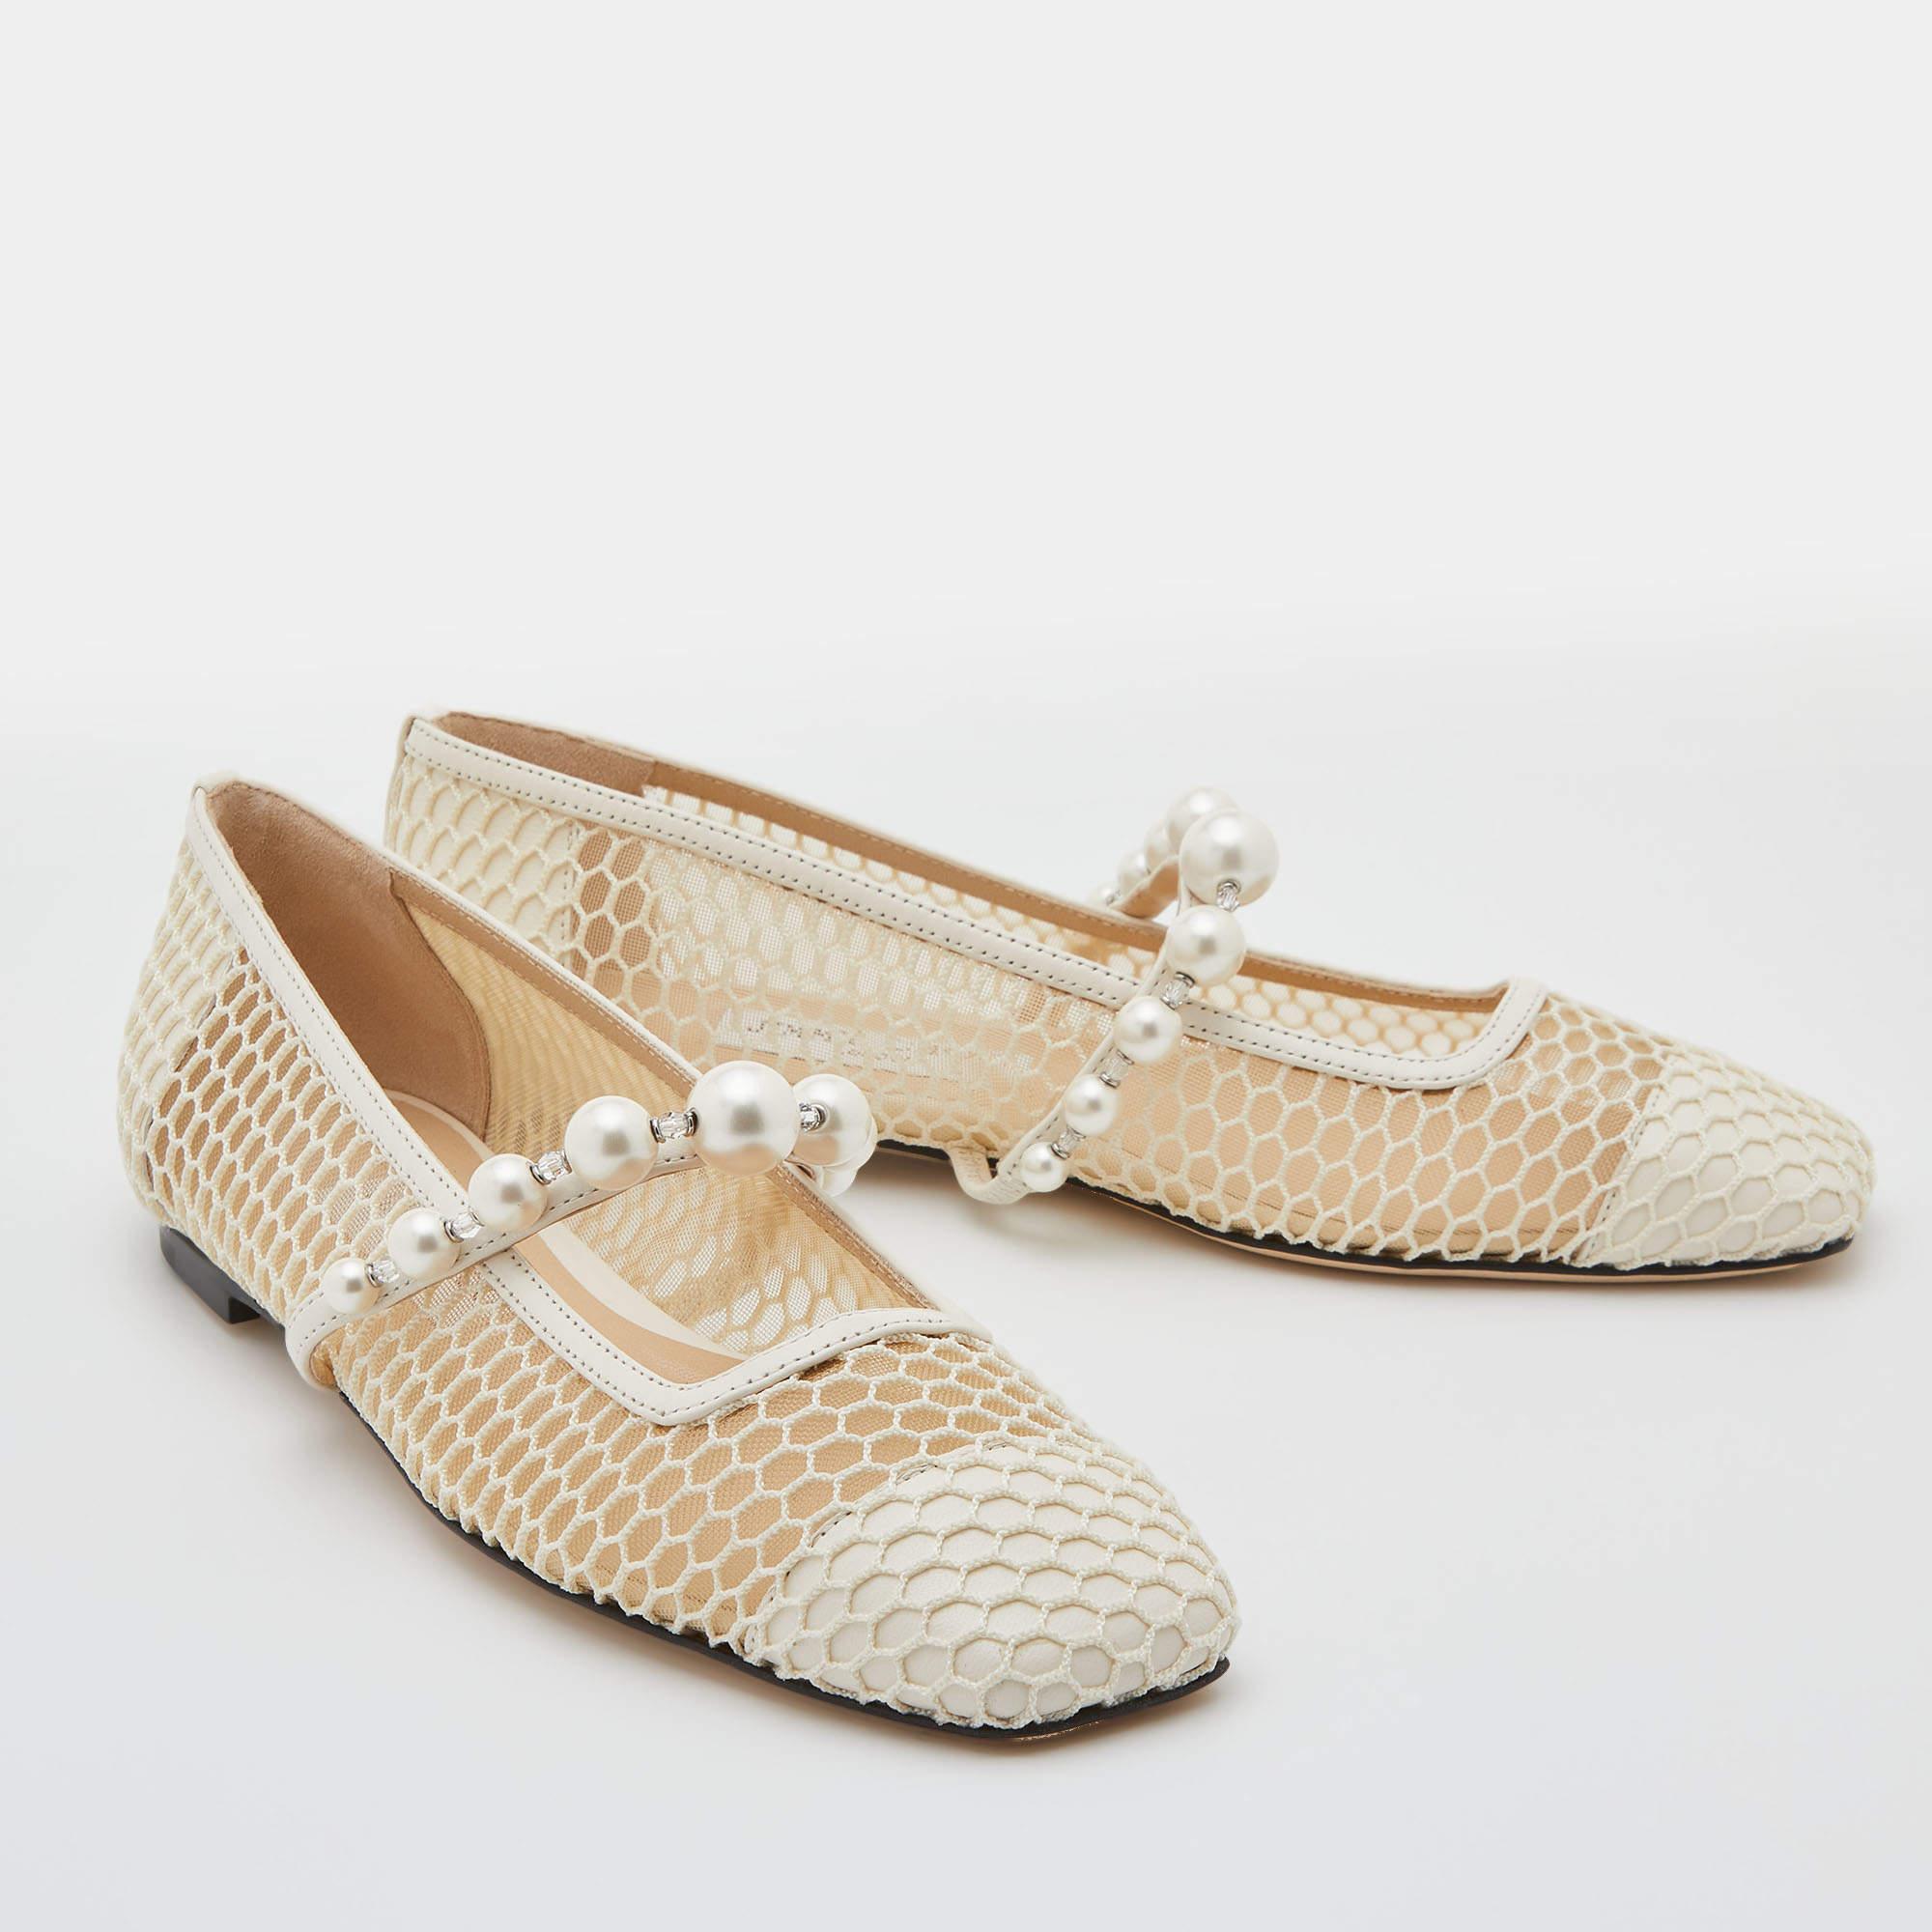 A perfect blend of luxury, style, and comfort, these designer flats are made using quality materials and frame your feet in the most elegant way. They can be paired with a host of outfits from your wardrobe.

Includes: Original Dustbag, Original